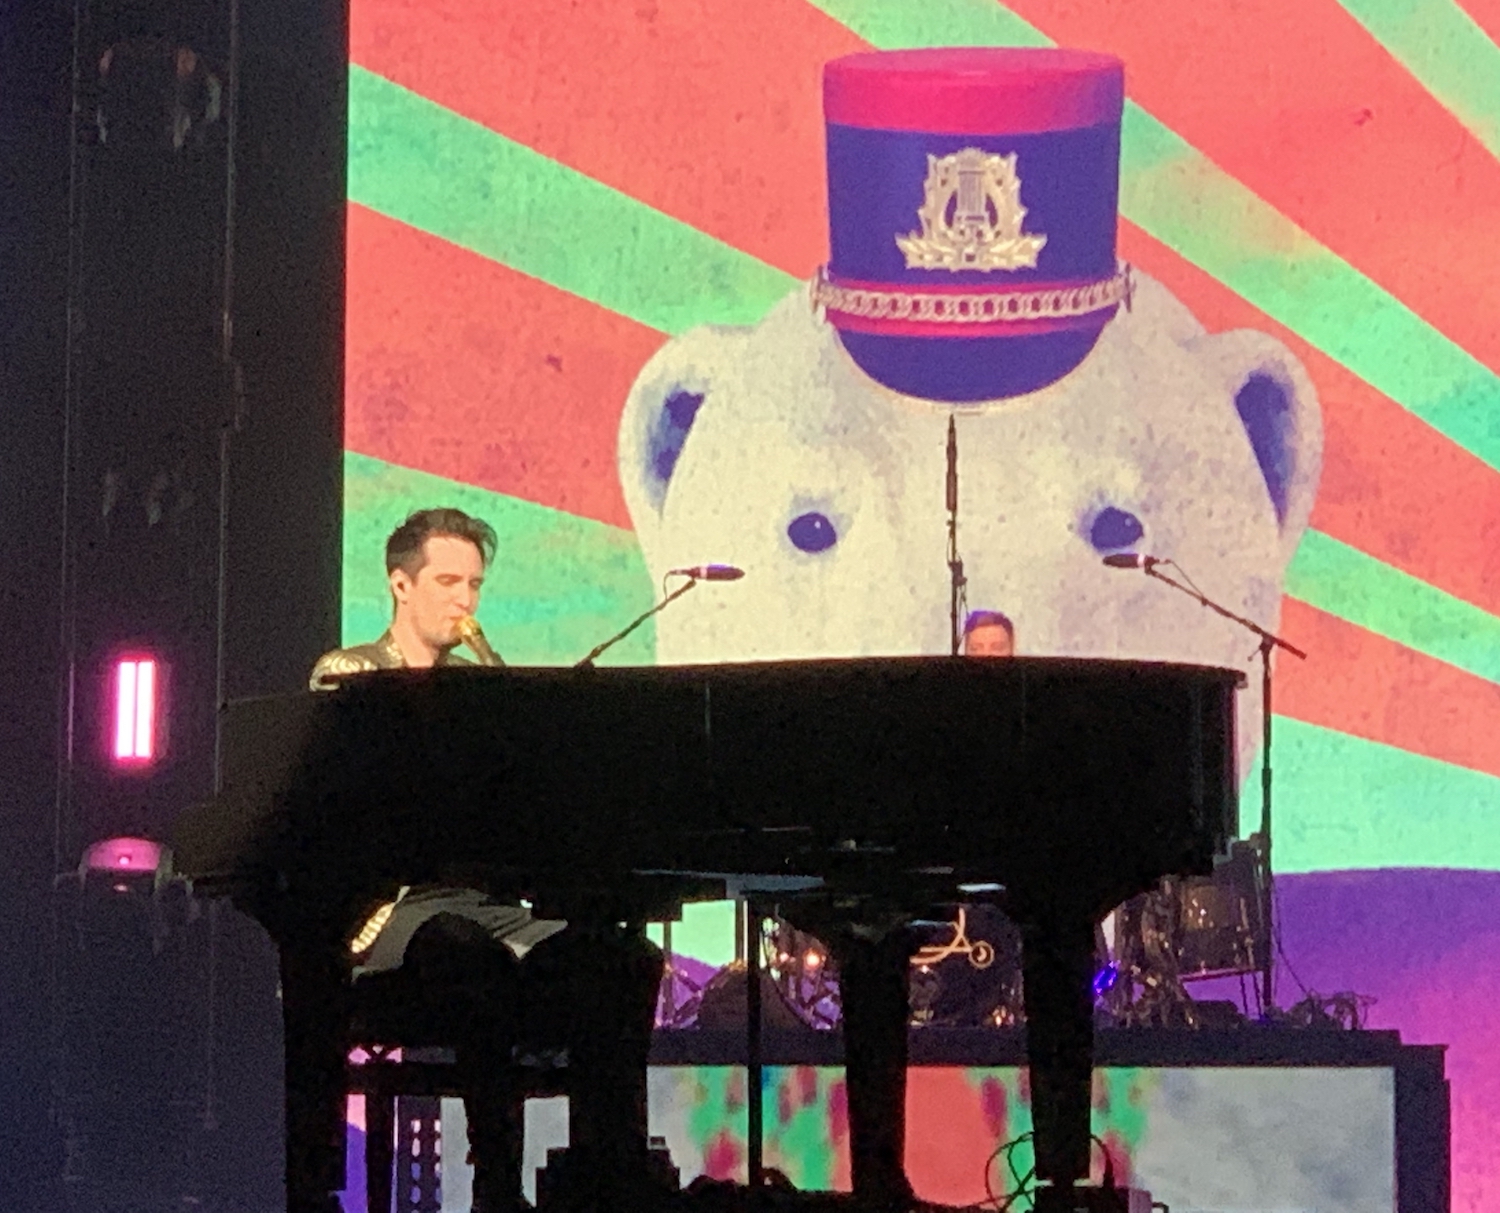 Branded Urie seated at the Piano